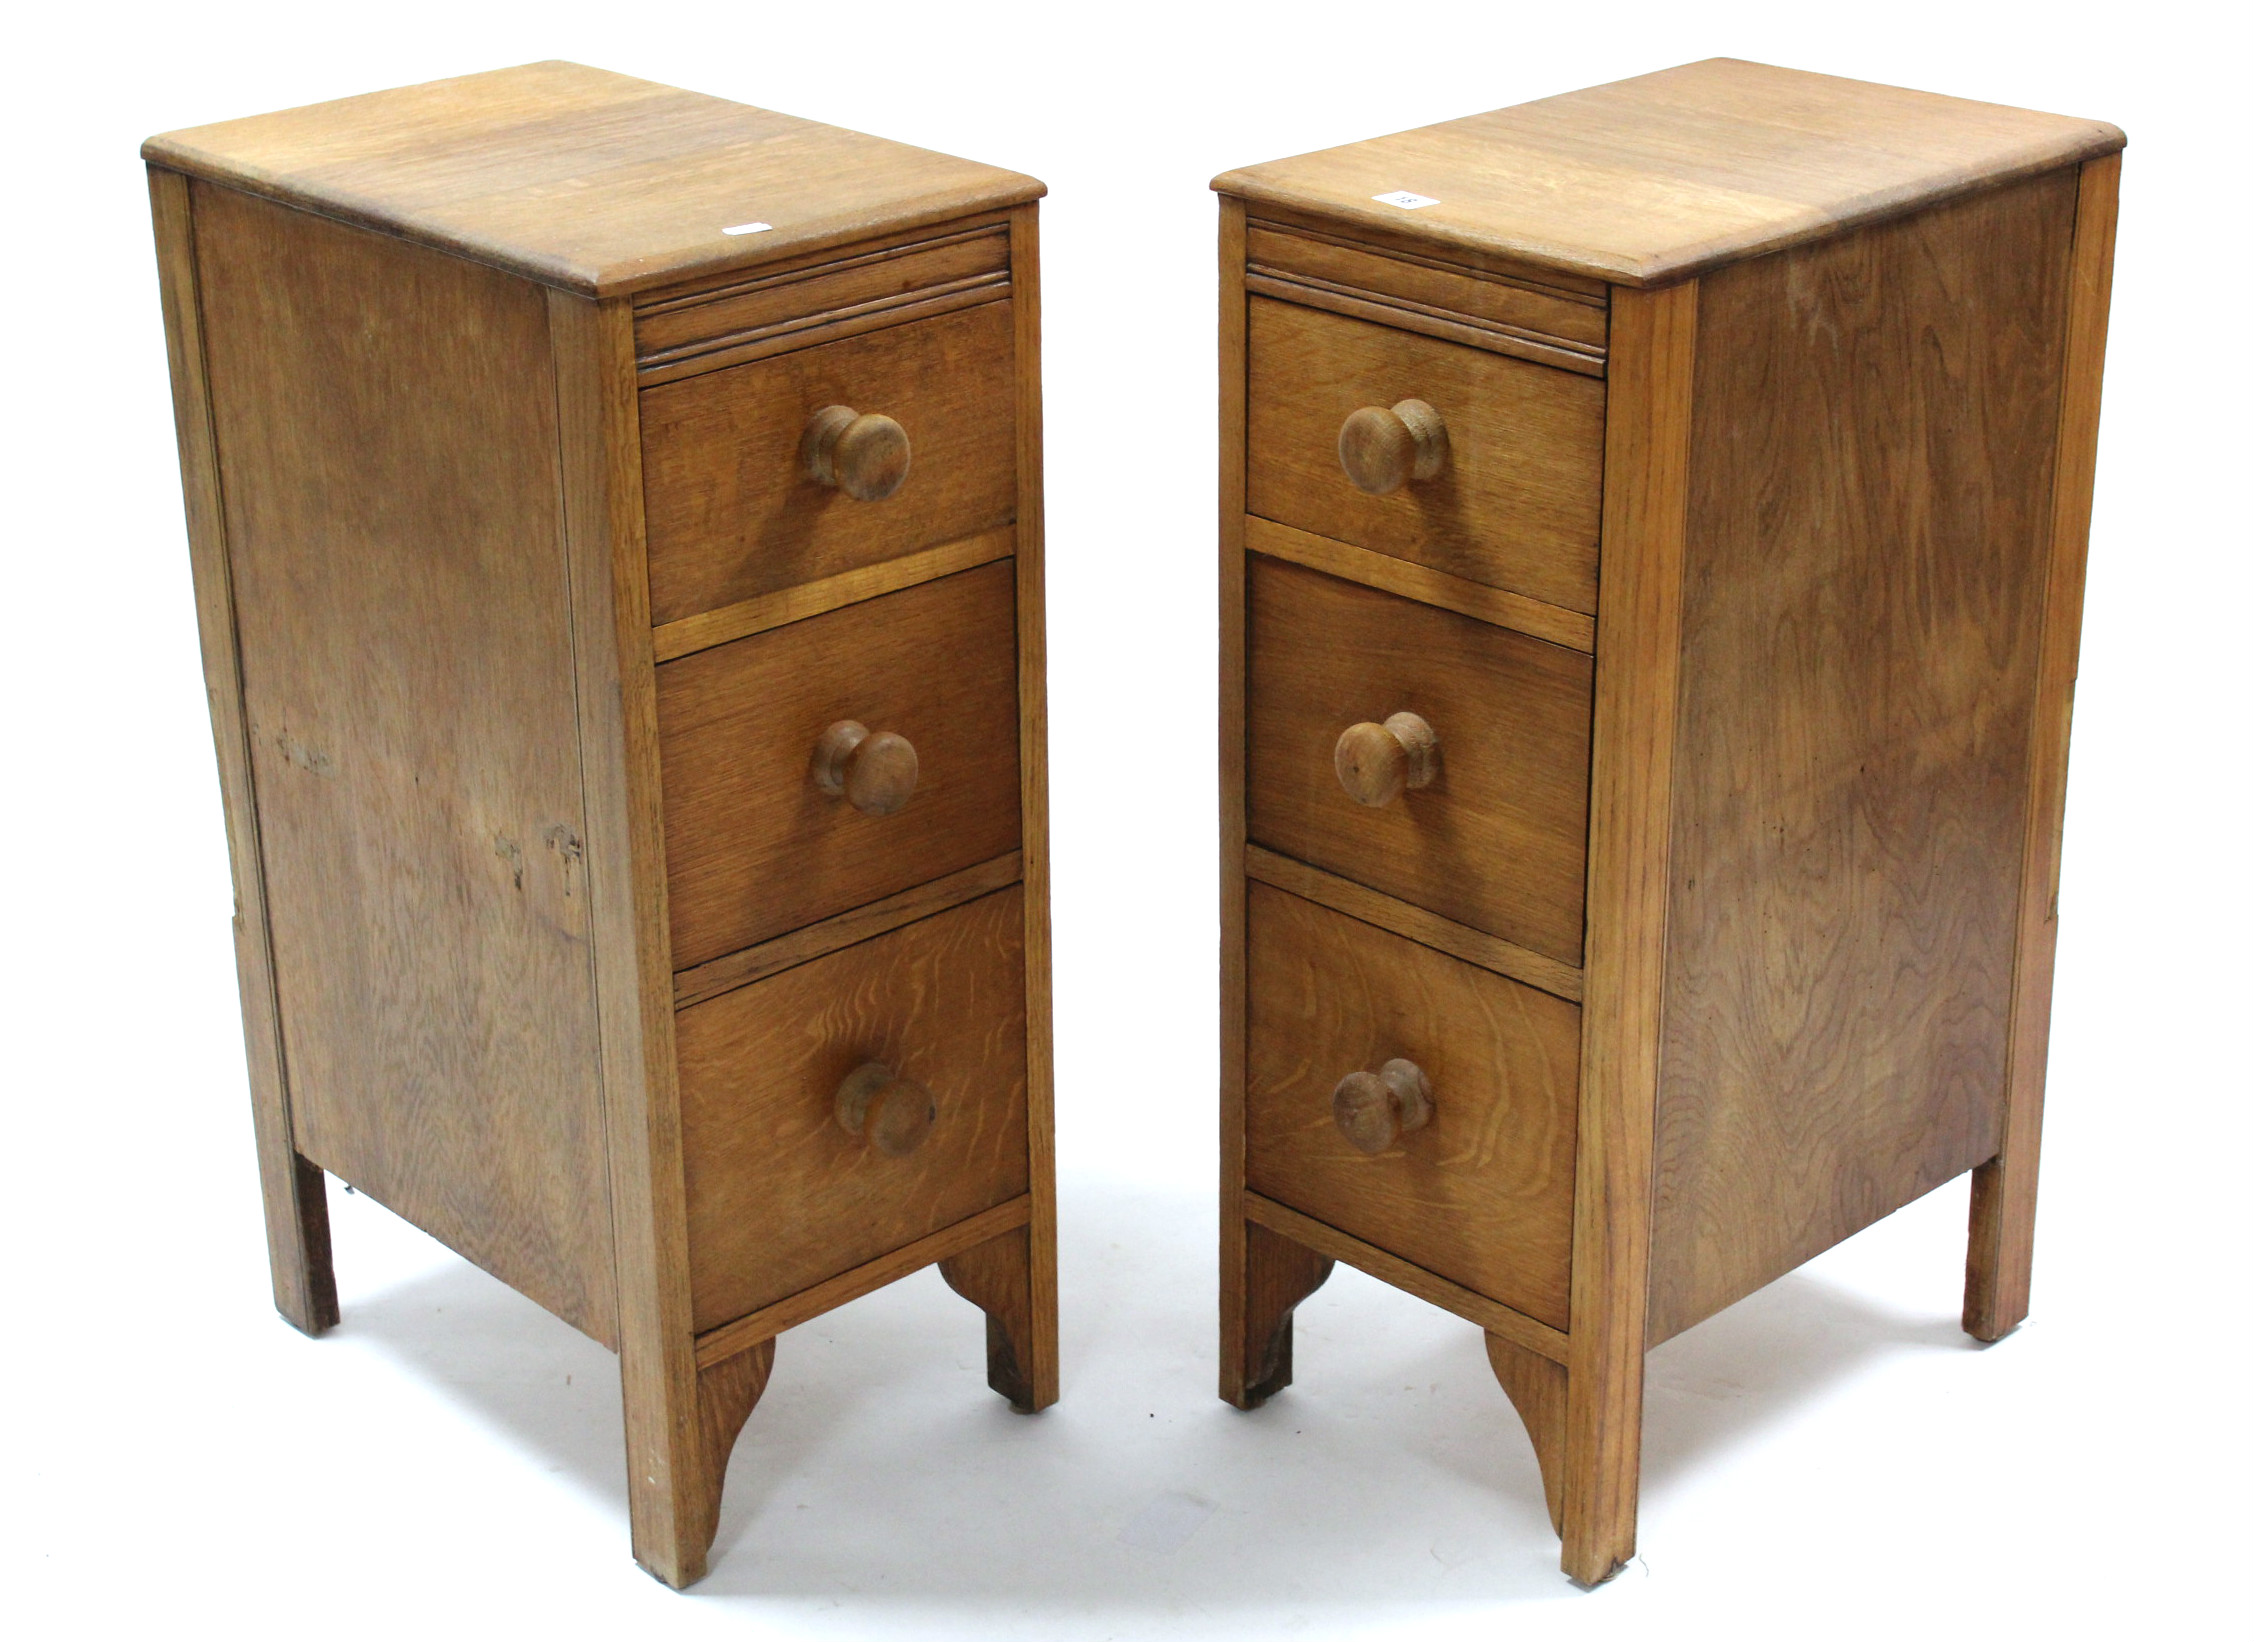 A pair of light oak three-drawer chests of narrow proportions, 12” wide x 30” high; & a light oak